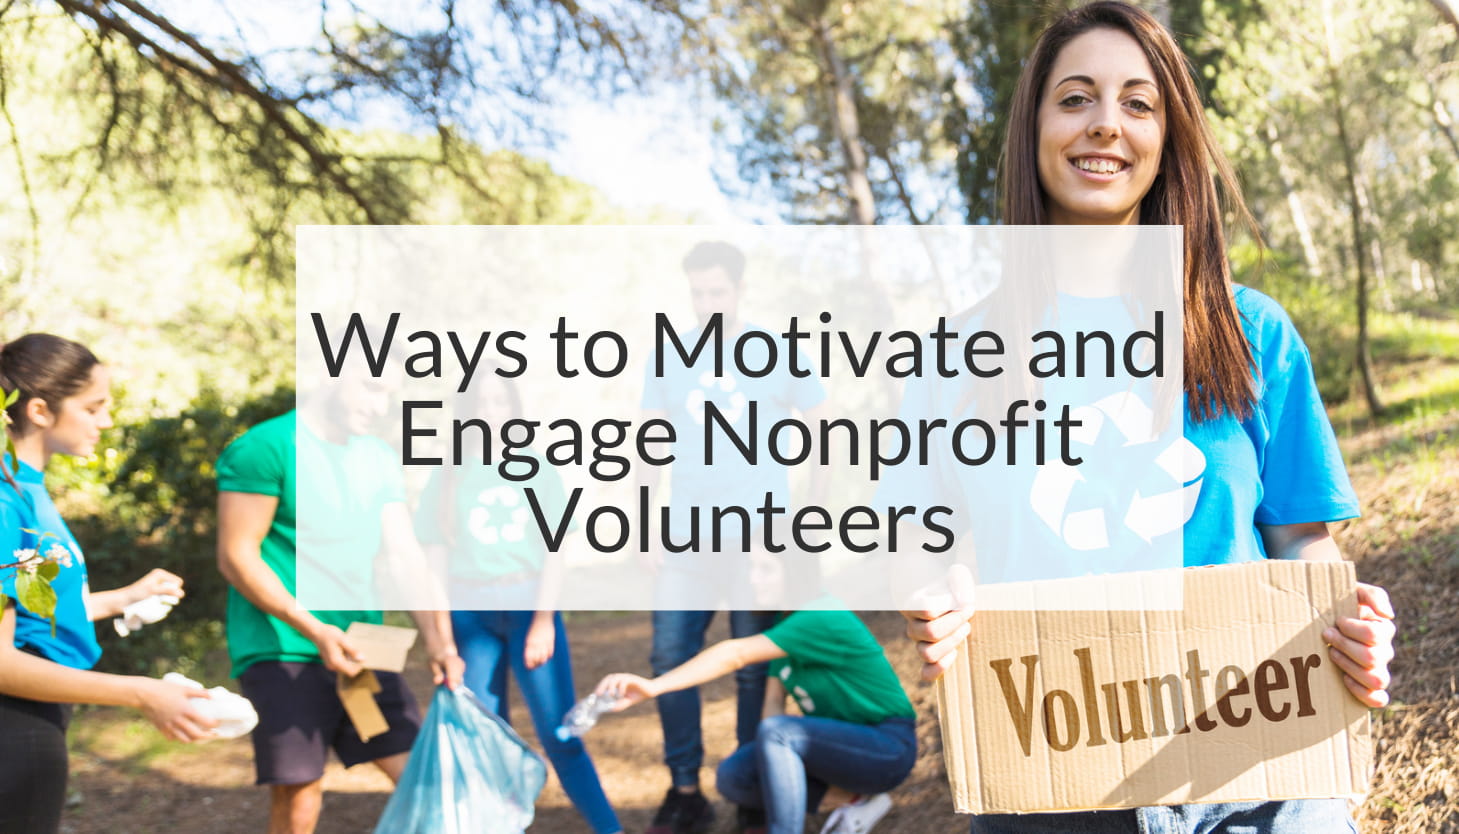 8 Ways to Motivate and Engage Your Nonprofit’s Volunteers